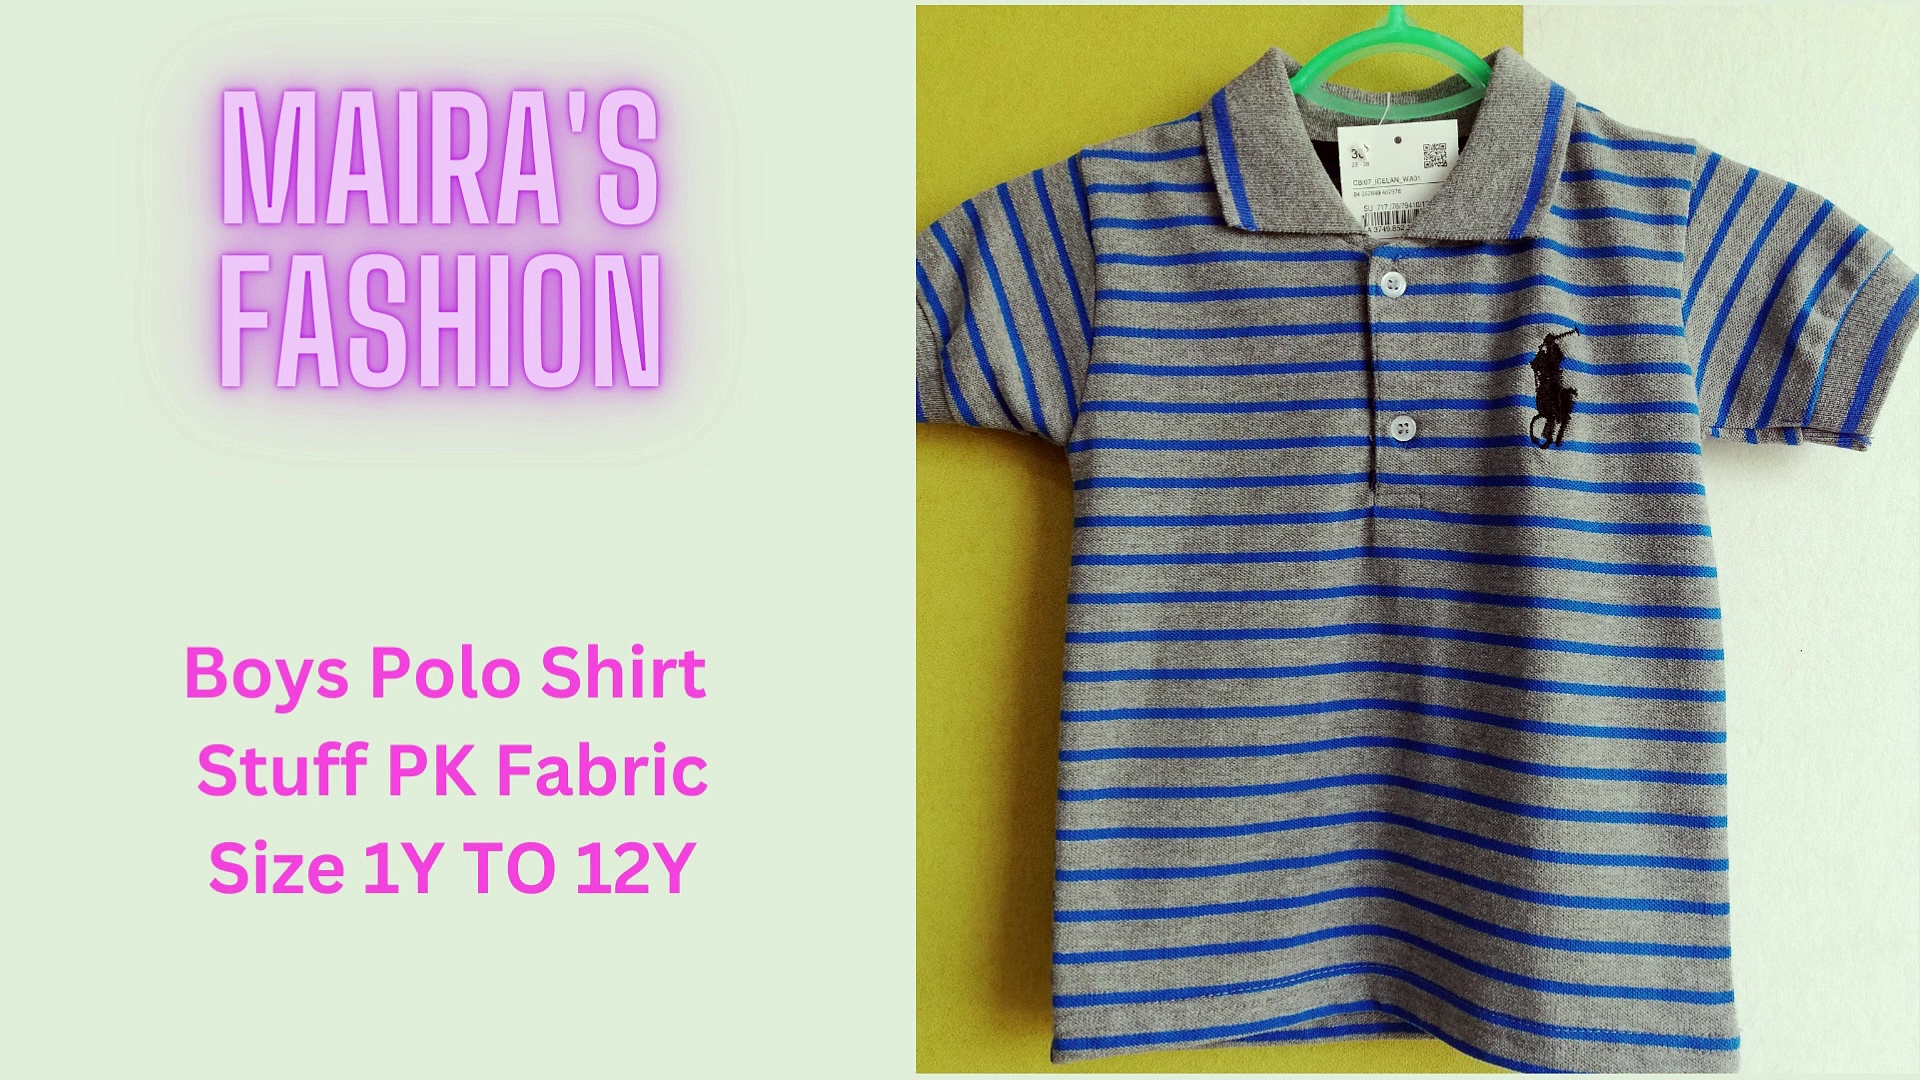 Branded Polo shirt for kids on wholesale